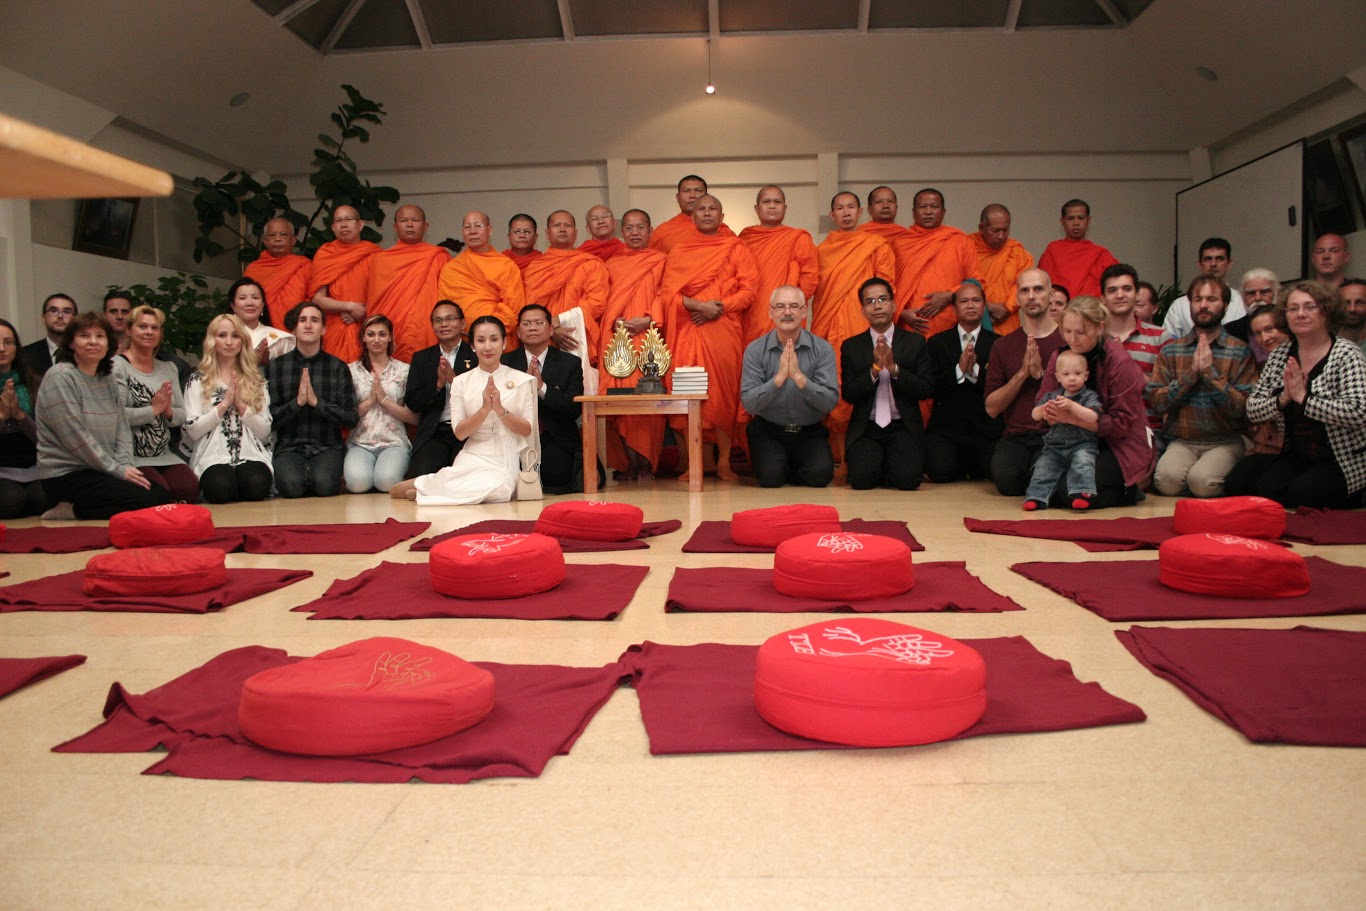 Thai Monk delegation (MCU) visited us for the purpose of joint research cooperation